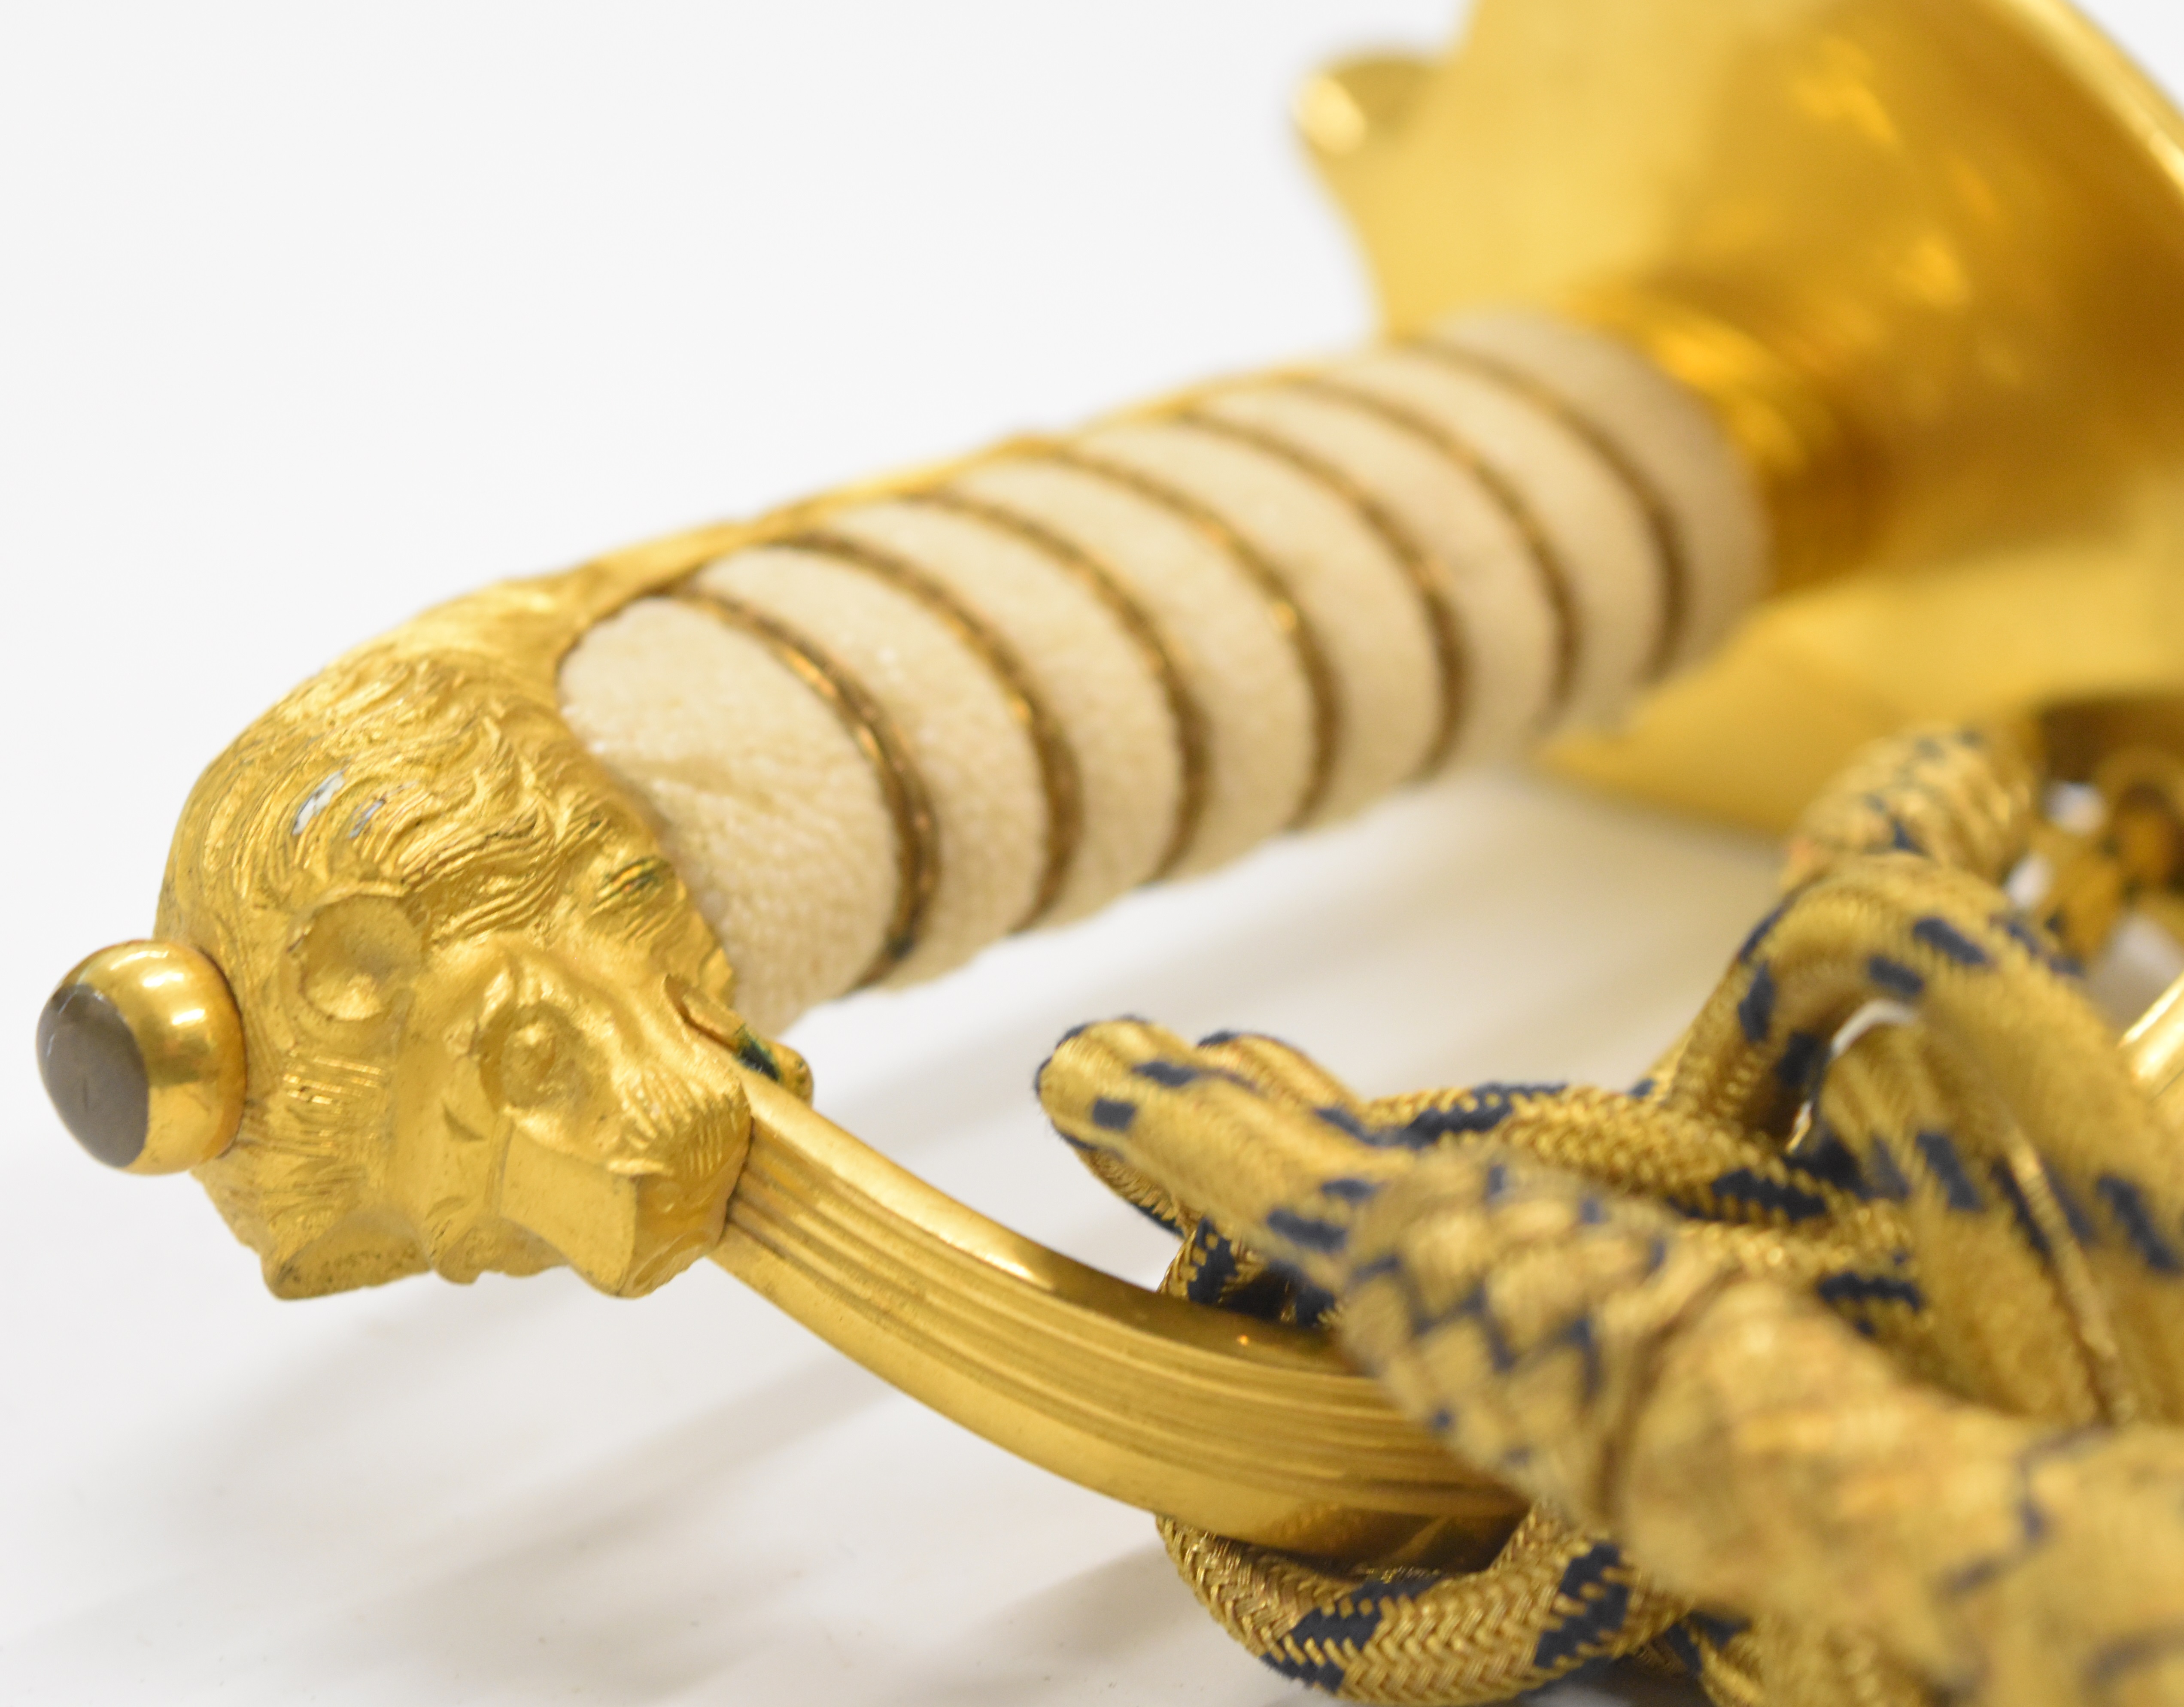 Royal Navy 1827 pattern officer's dress sword with lion head pommel, folding guard, fouled anchor - Image 6 of 10